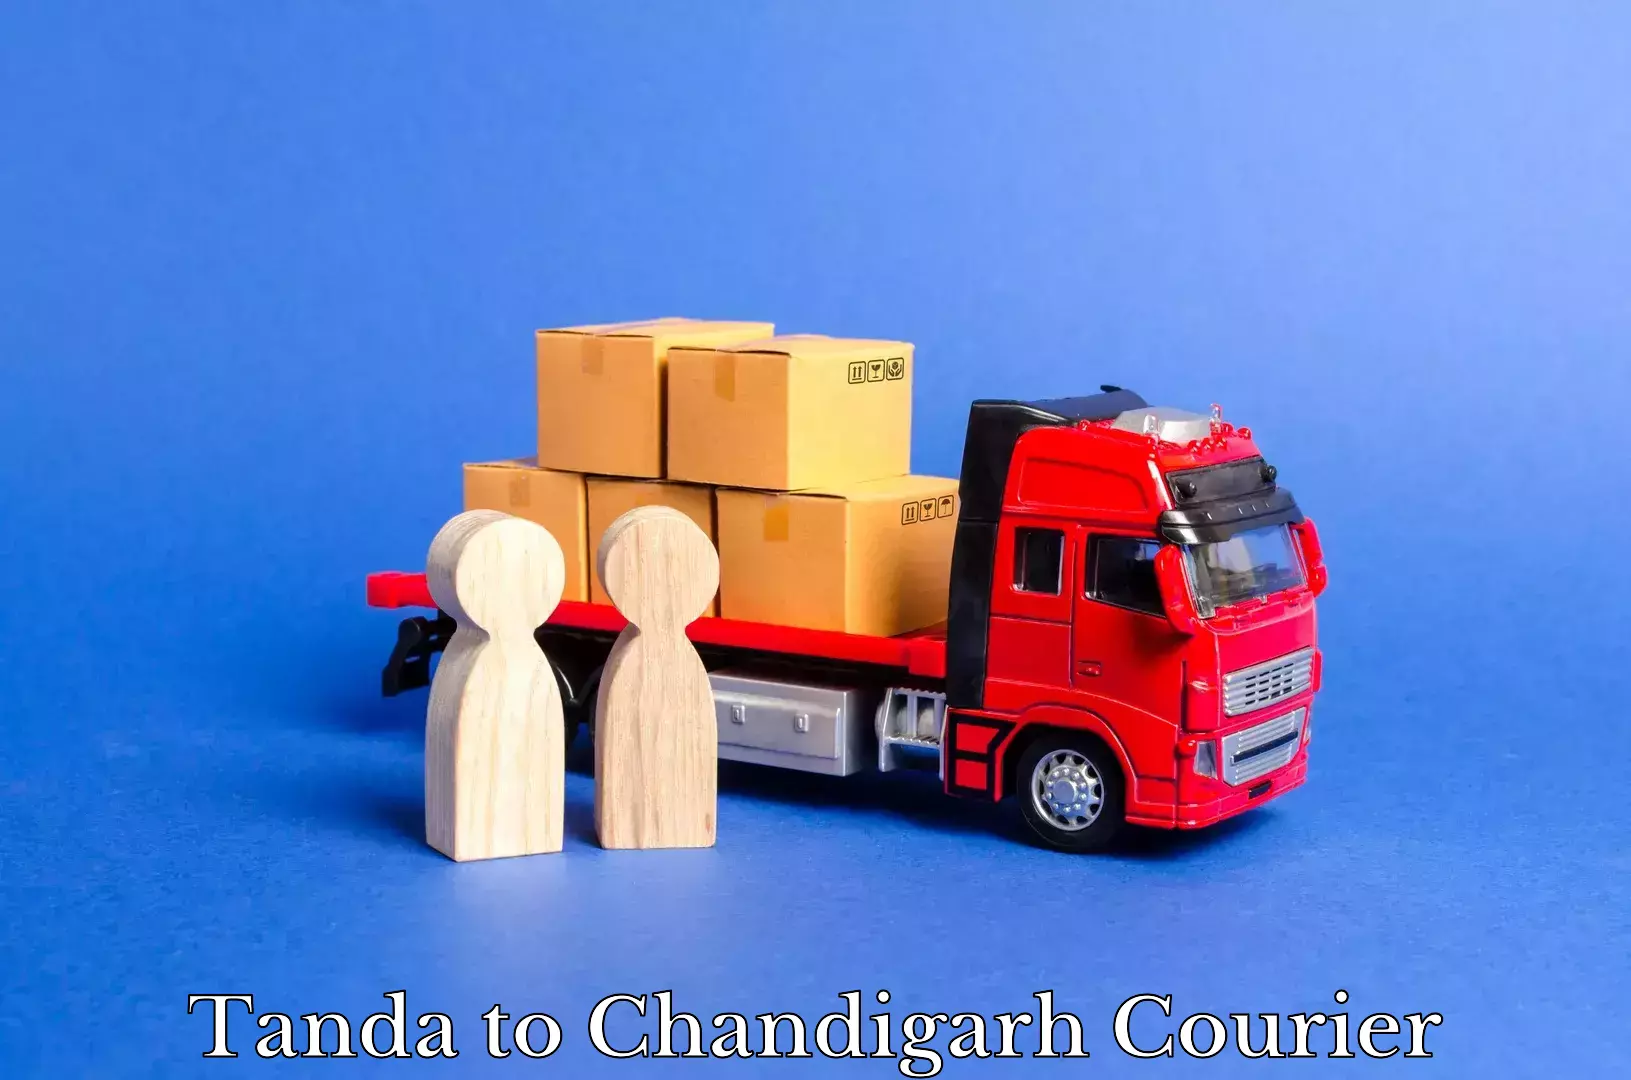 Enhanced tracking features in Tanda to Chandigarh